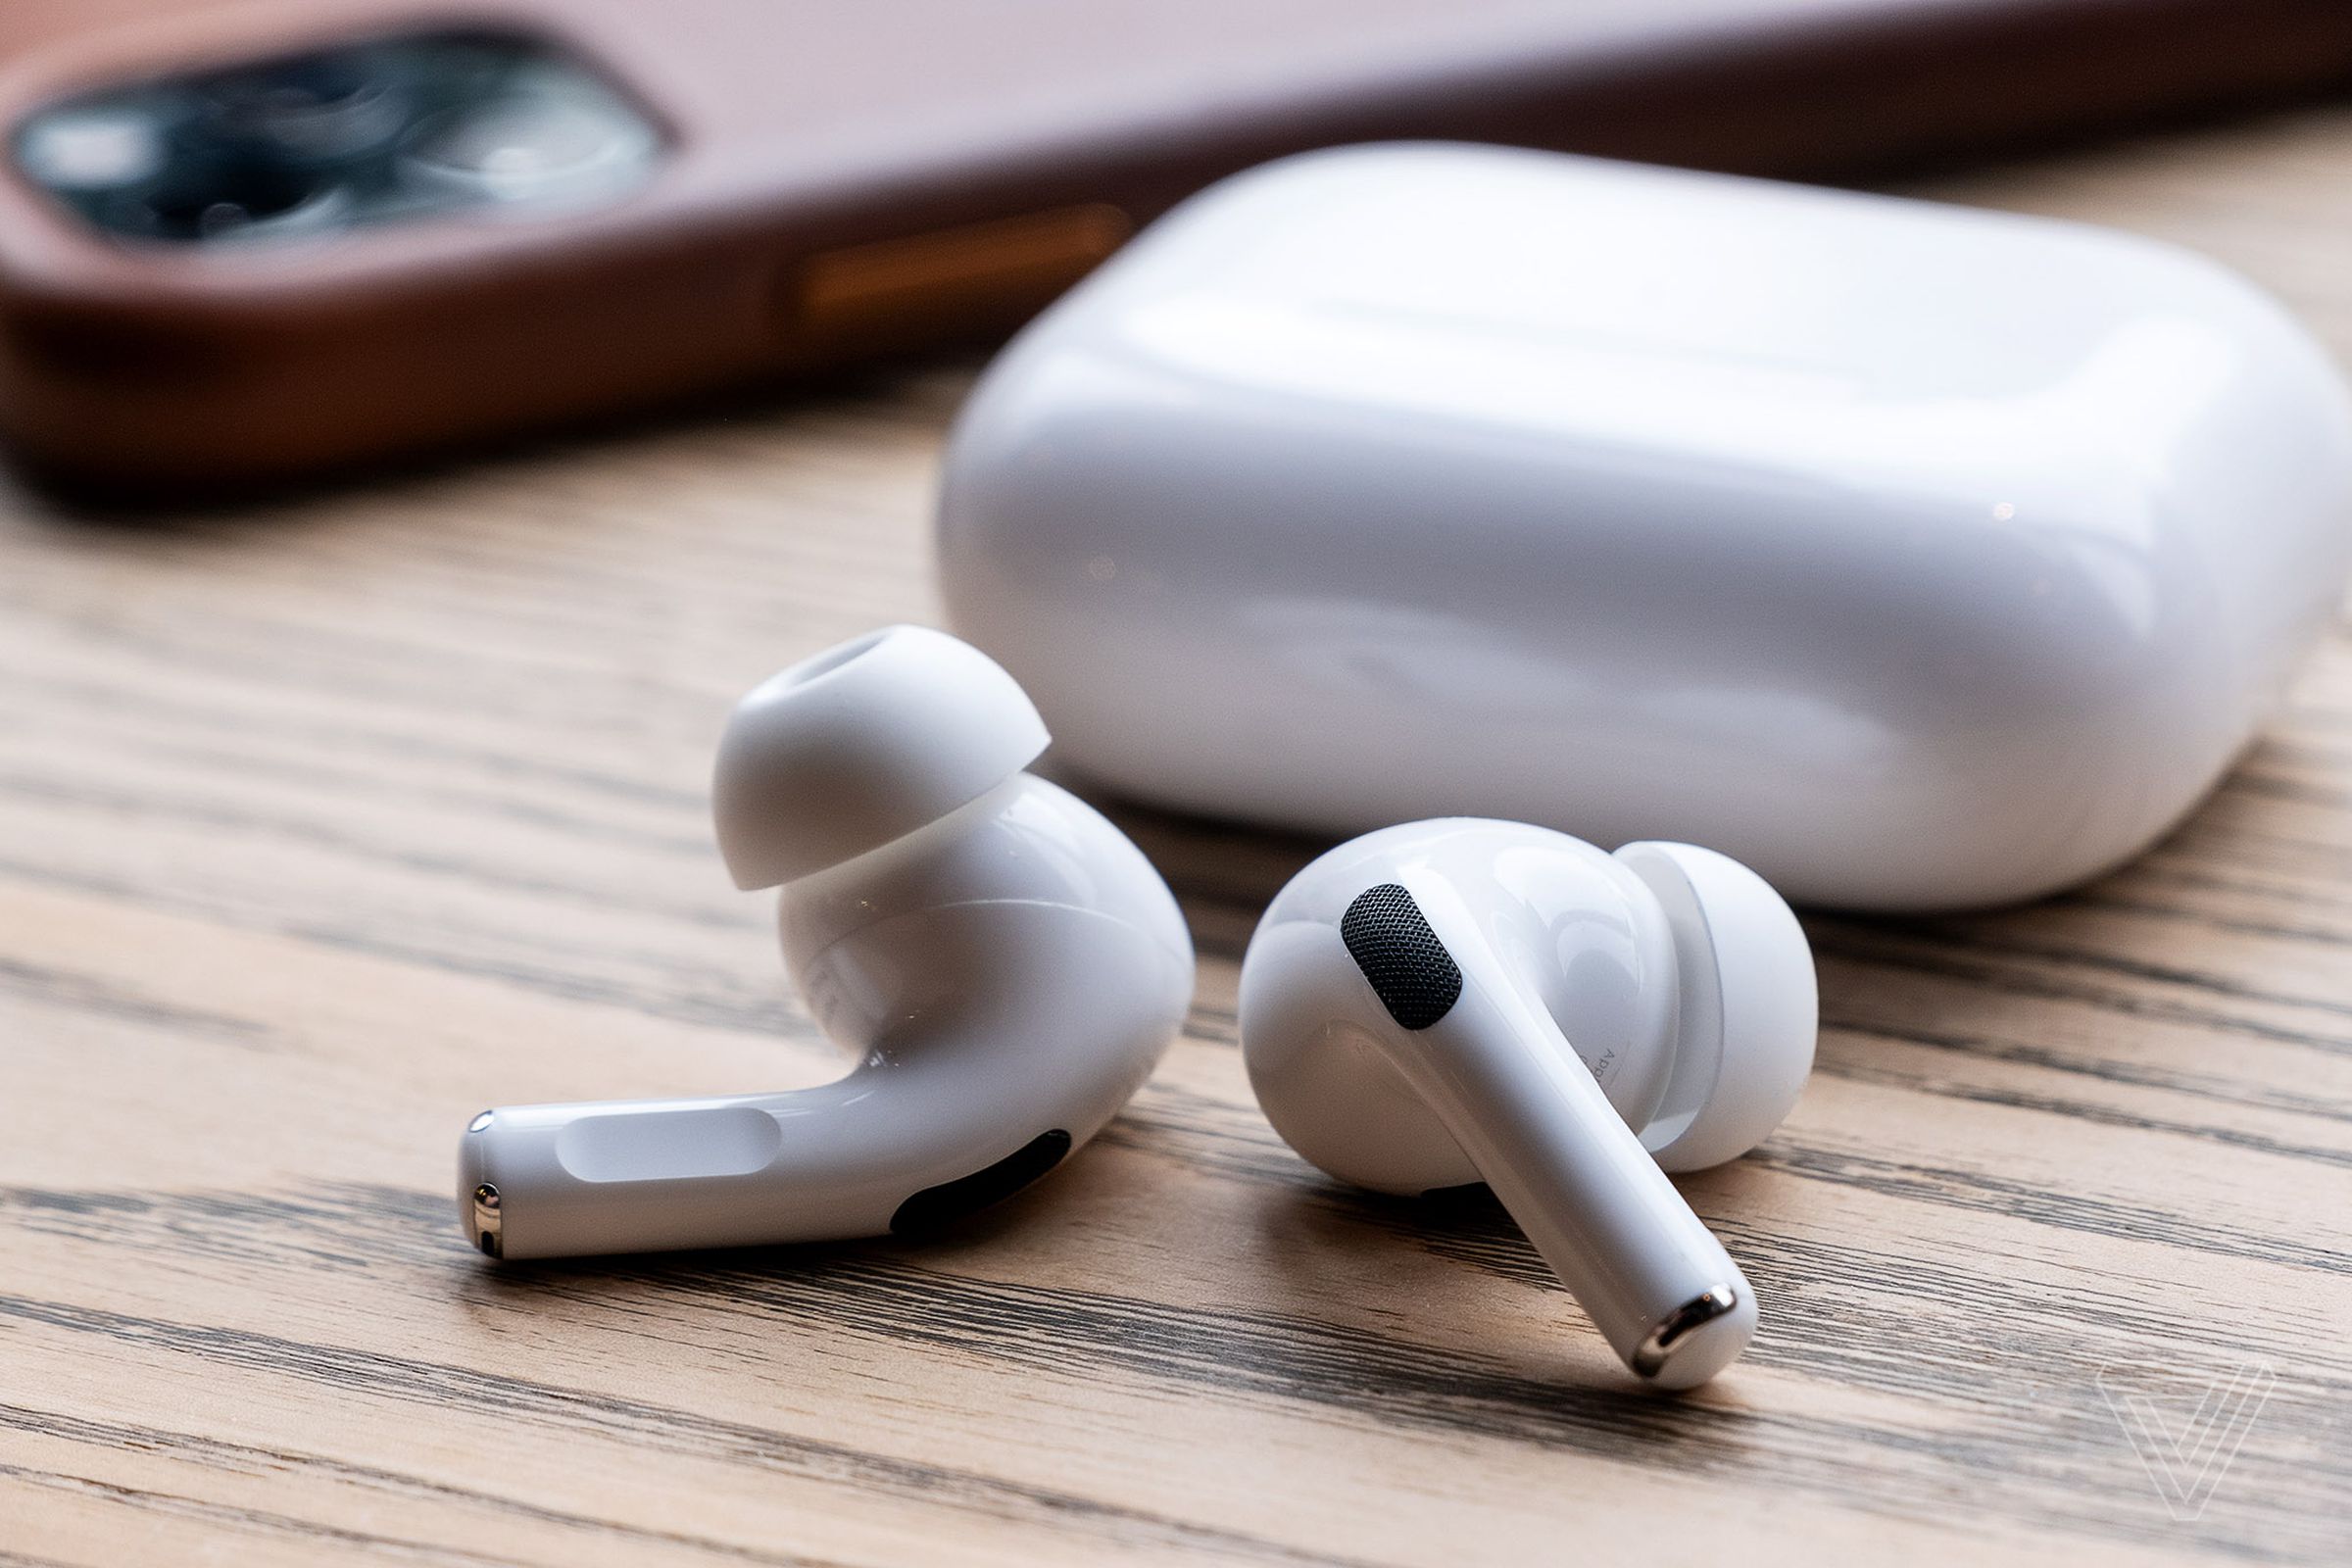 Apple’s AirPods Pro can help filter out the noise in crowded study spots.